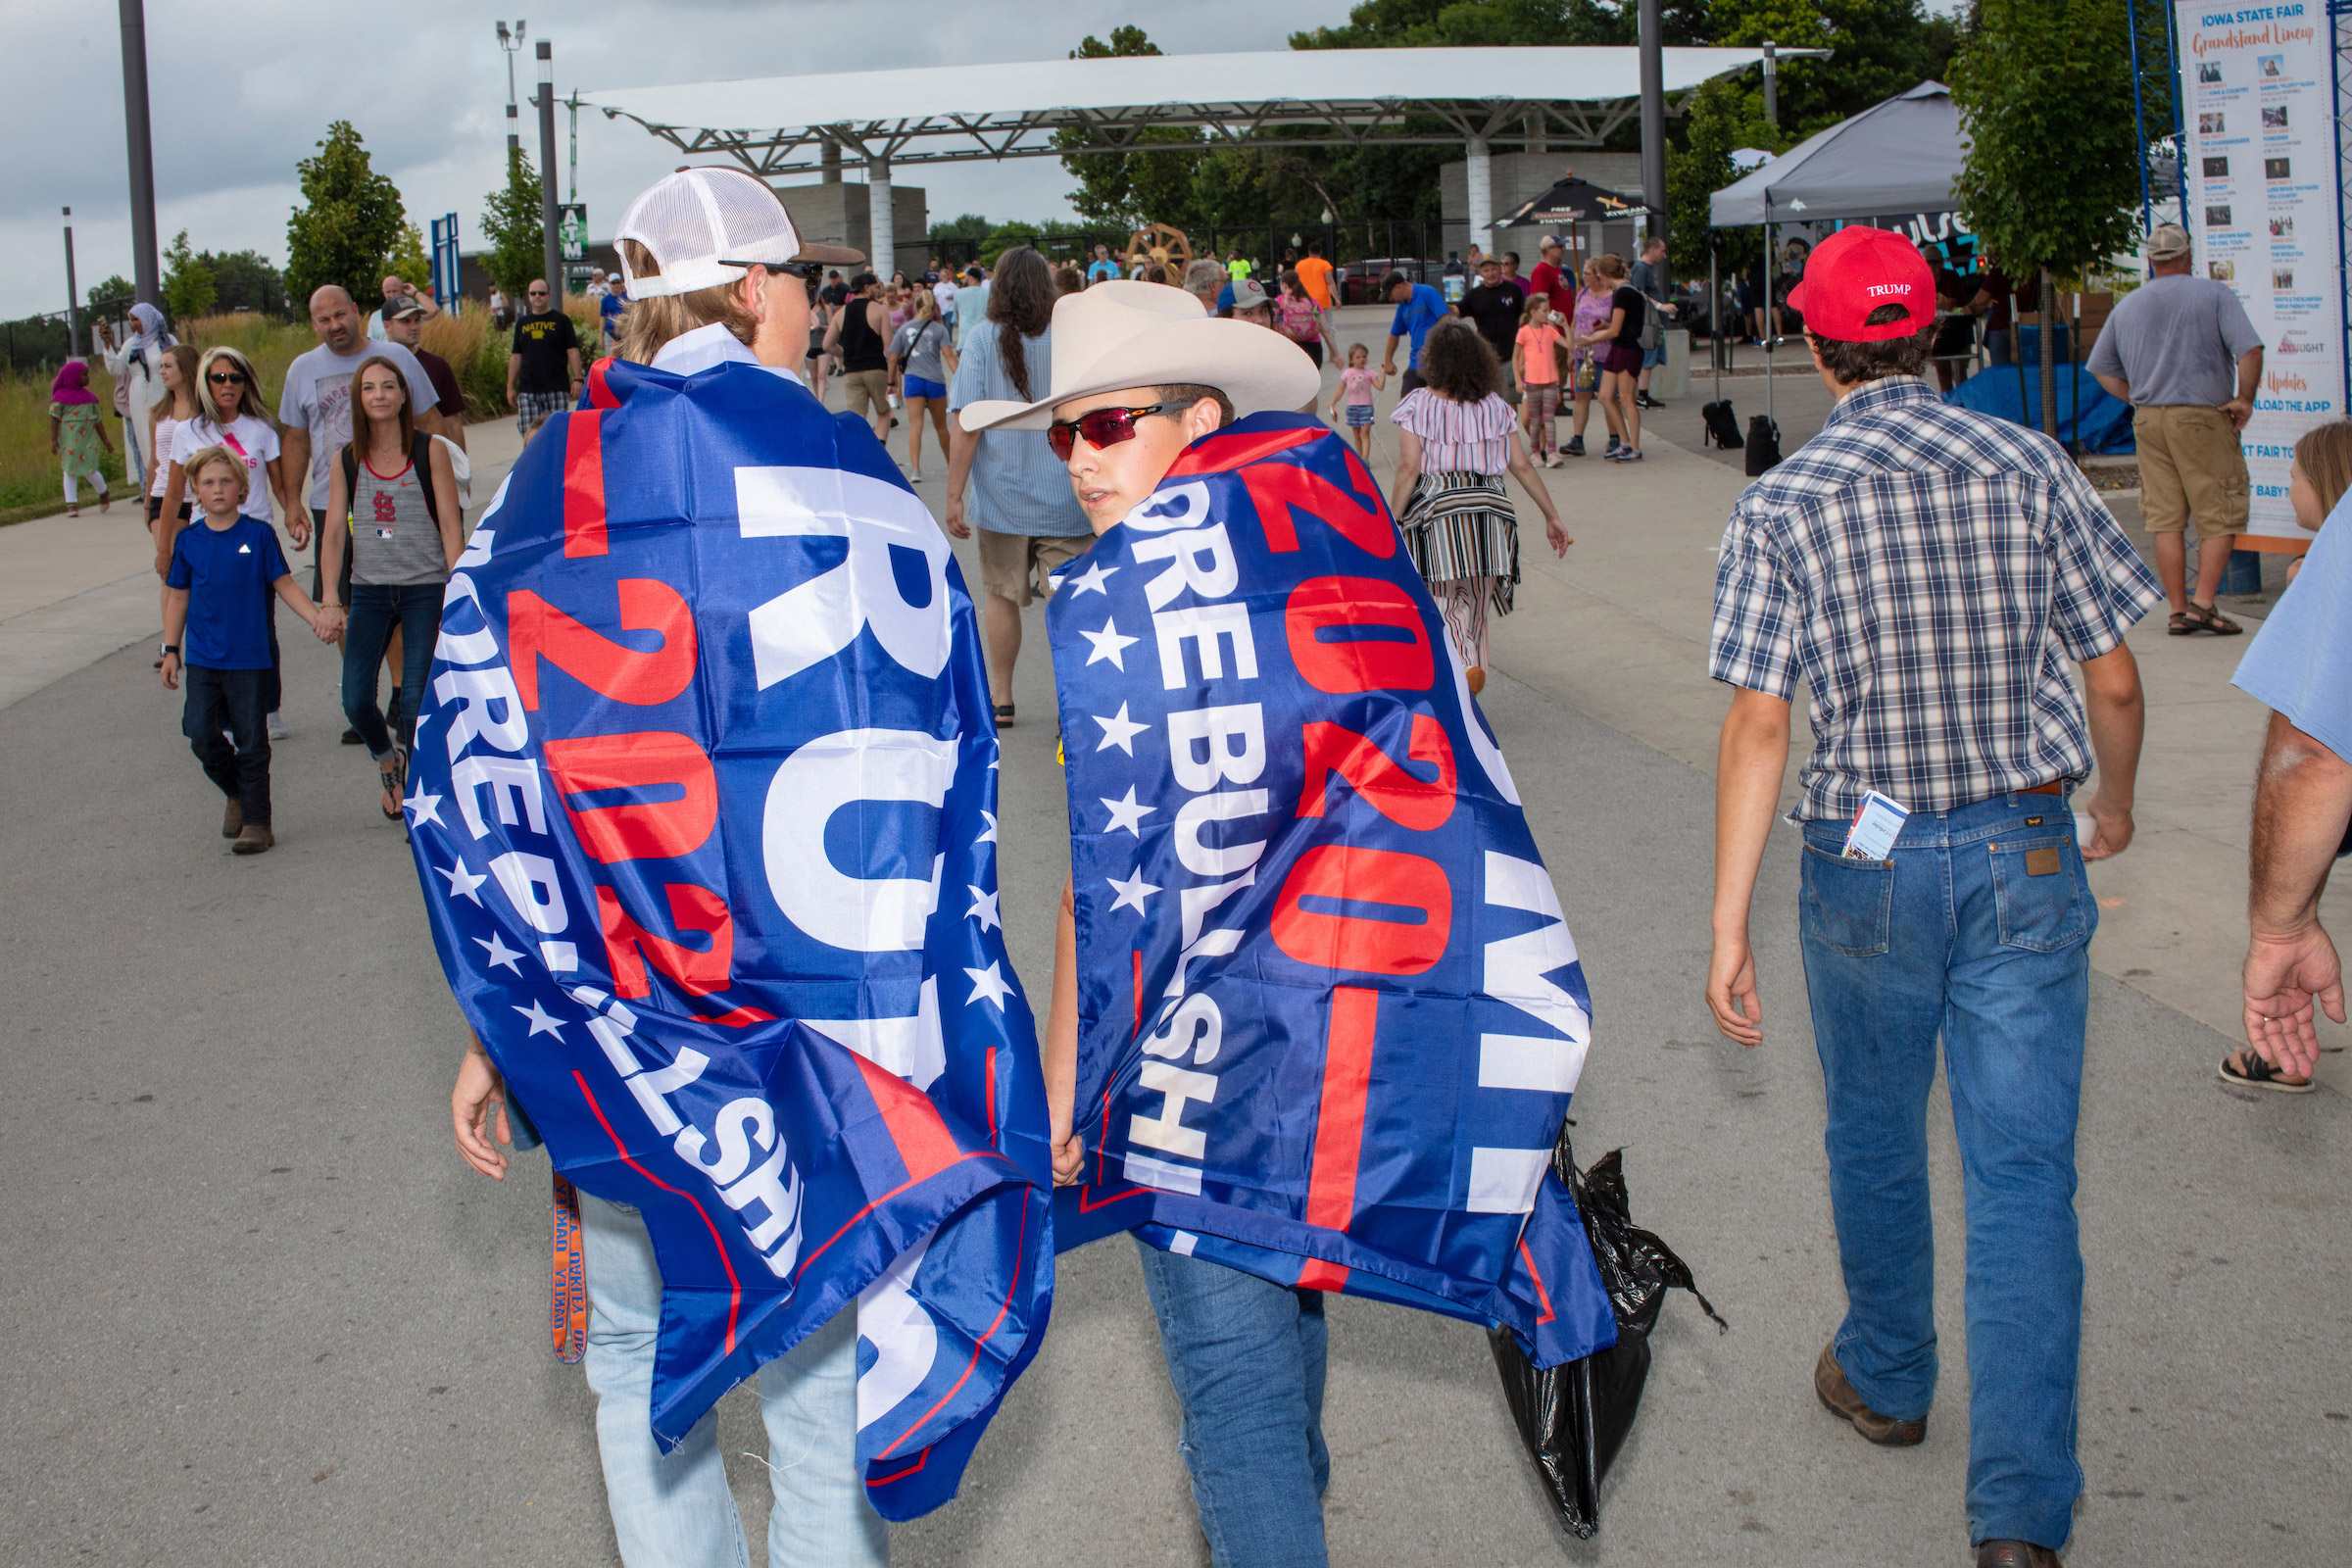 People wearing Trump flags walked ahead of the media scrum as Democratic presidential candidate Bernie Sanders walked along the midway at the Iowa State Fair in Des, Moines, Iowa, on Sun., Aug. 11, 2019.